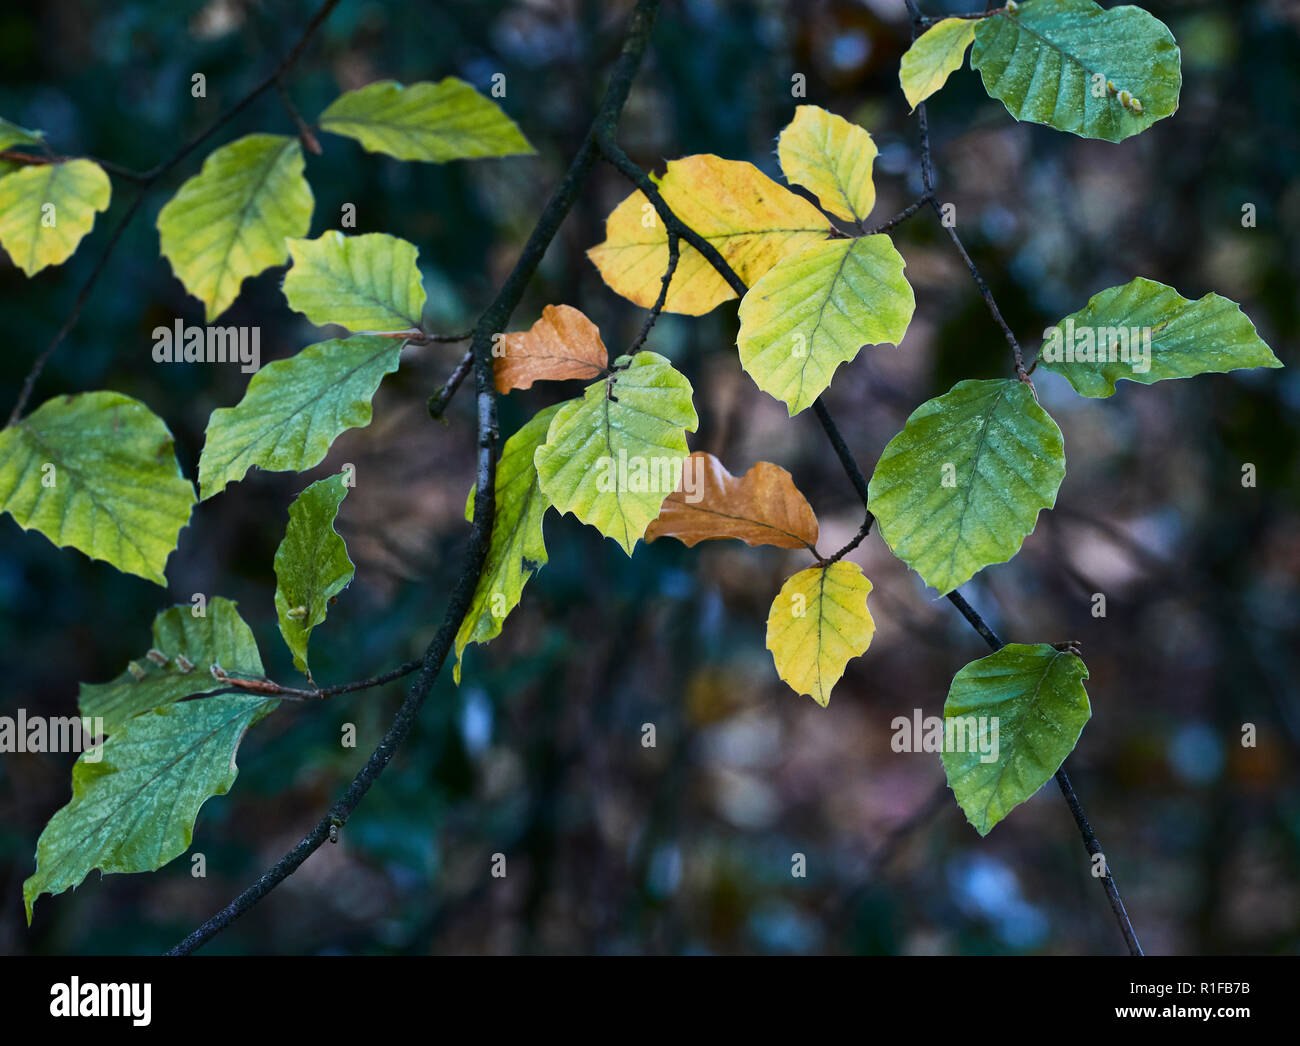 Many leaves hanging on a branch that are starting to change their colour at the begining of the autumn season Stock Photo